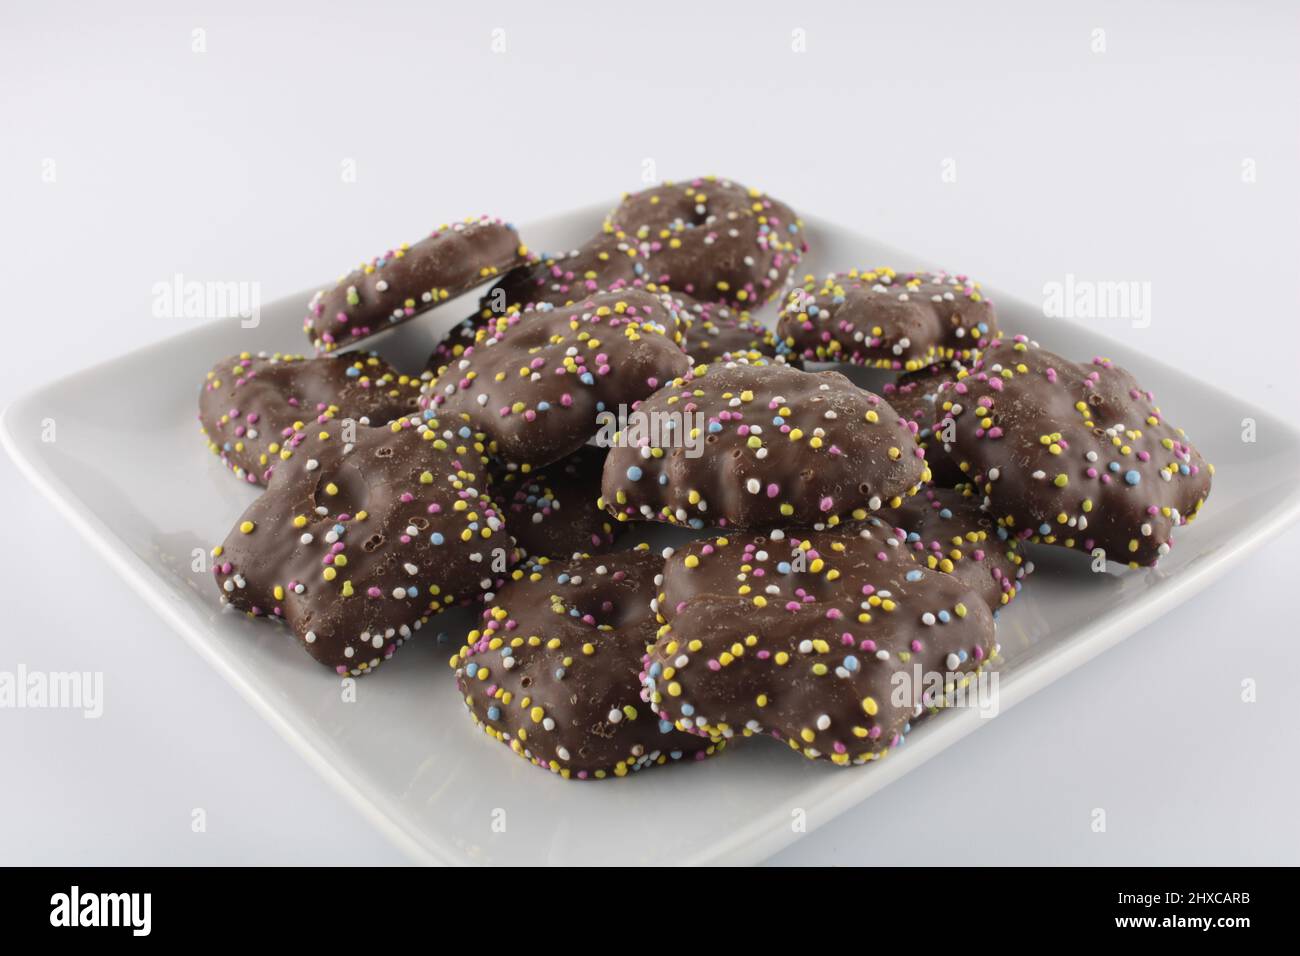 Biscuits covered in chocolate with hundred and thousands sprinkles isolated on a plate with copy space.  Sweet treats concept Stock Photo